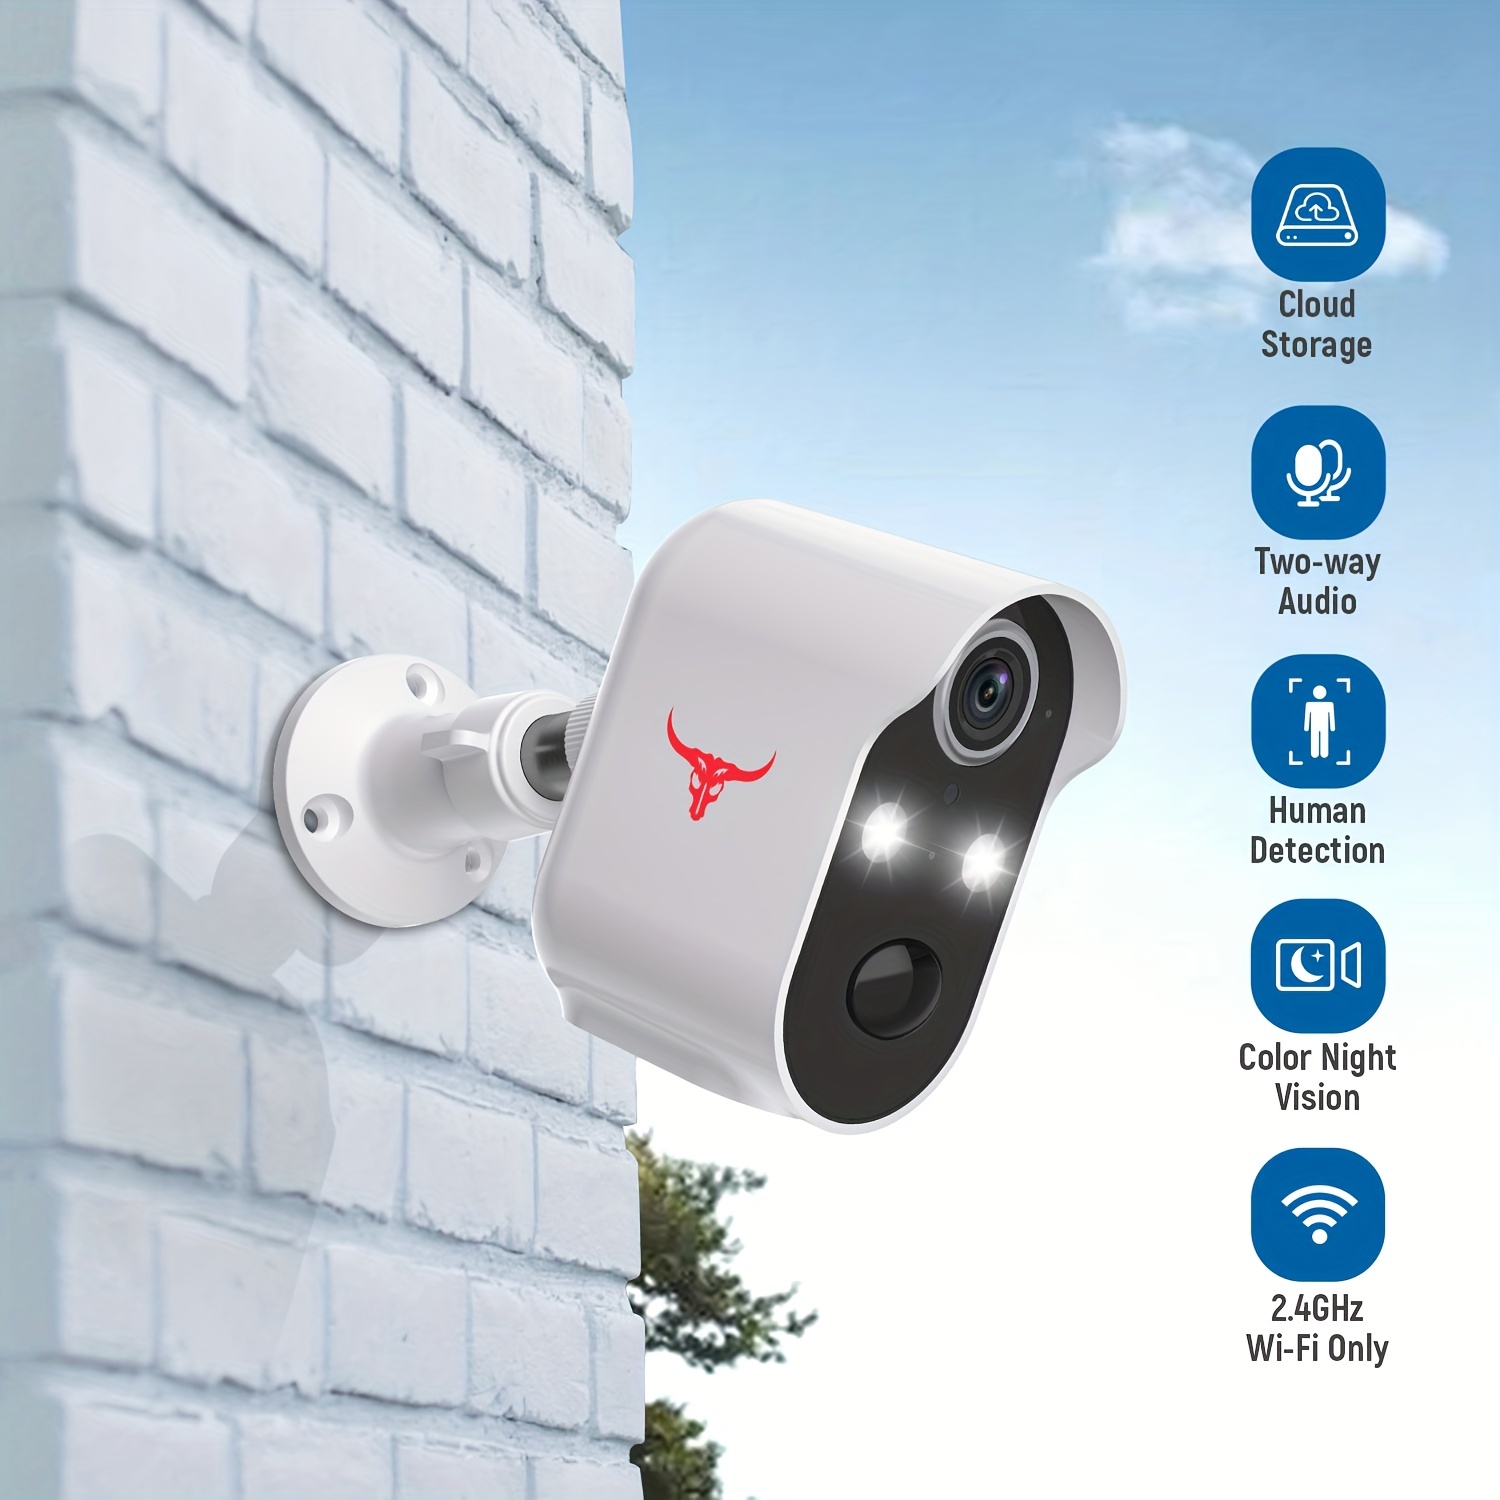 HD Outdoor Security Camera: Reliable & Easy Setup